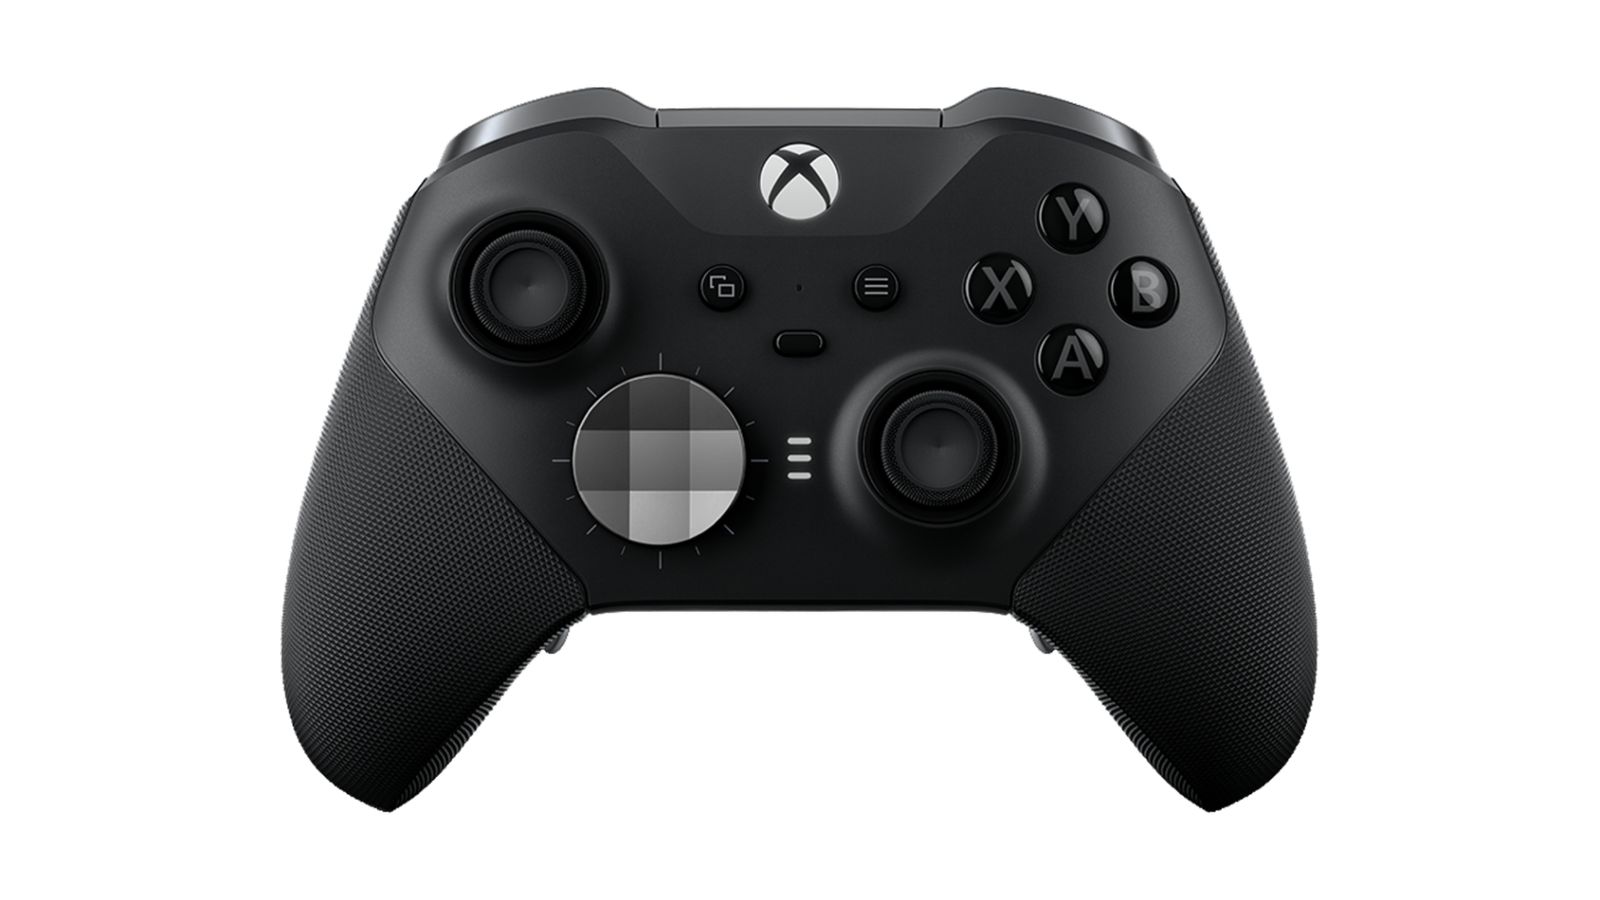 Xbox Elite Series 2 product image of a black Xbox controller featuring a white and grey track pad on the left.